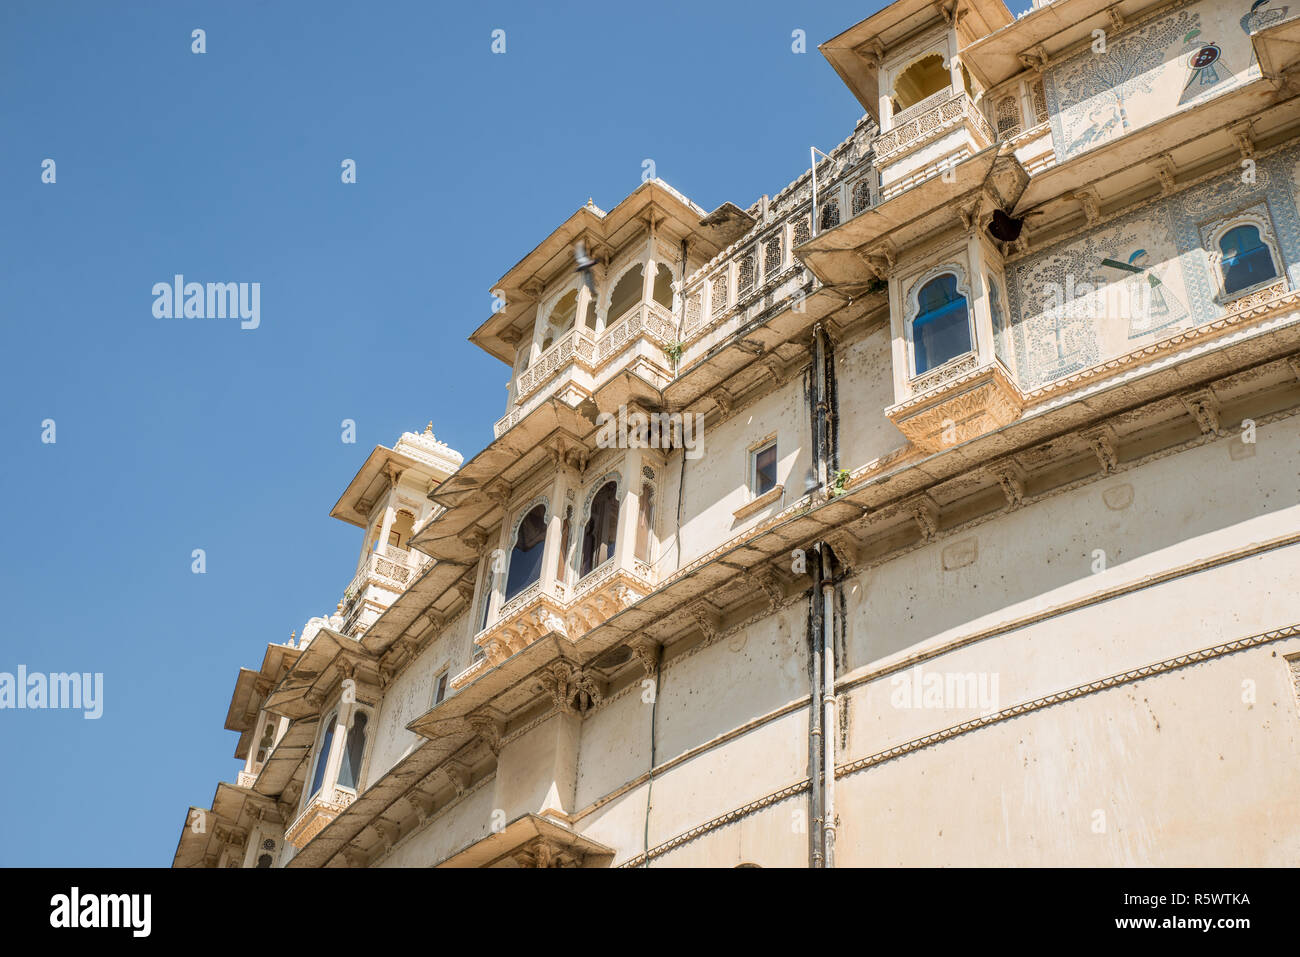 Outside view of City Palace building, Udaipur, Rajasthan, India Stock Photo